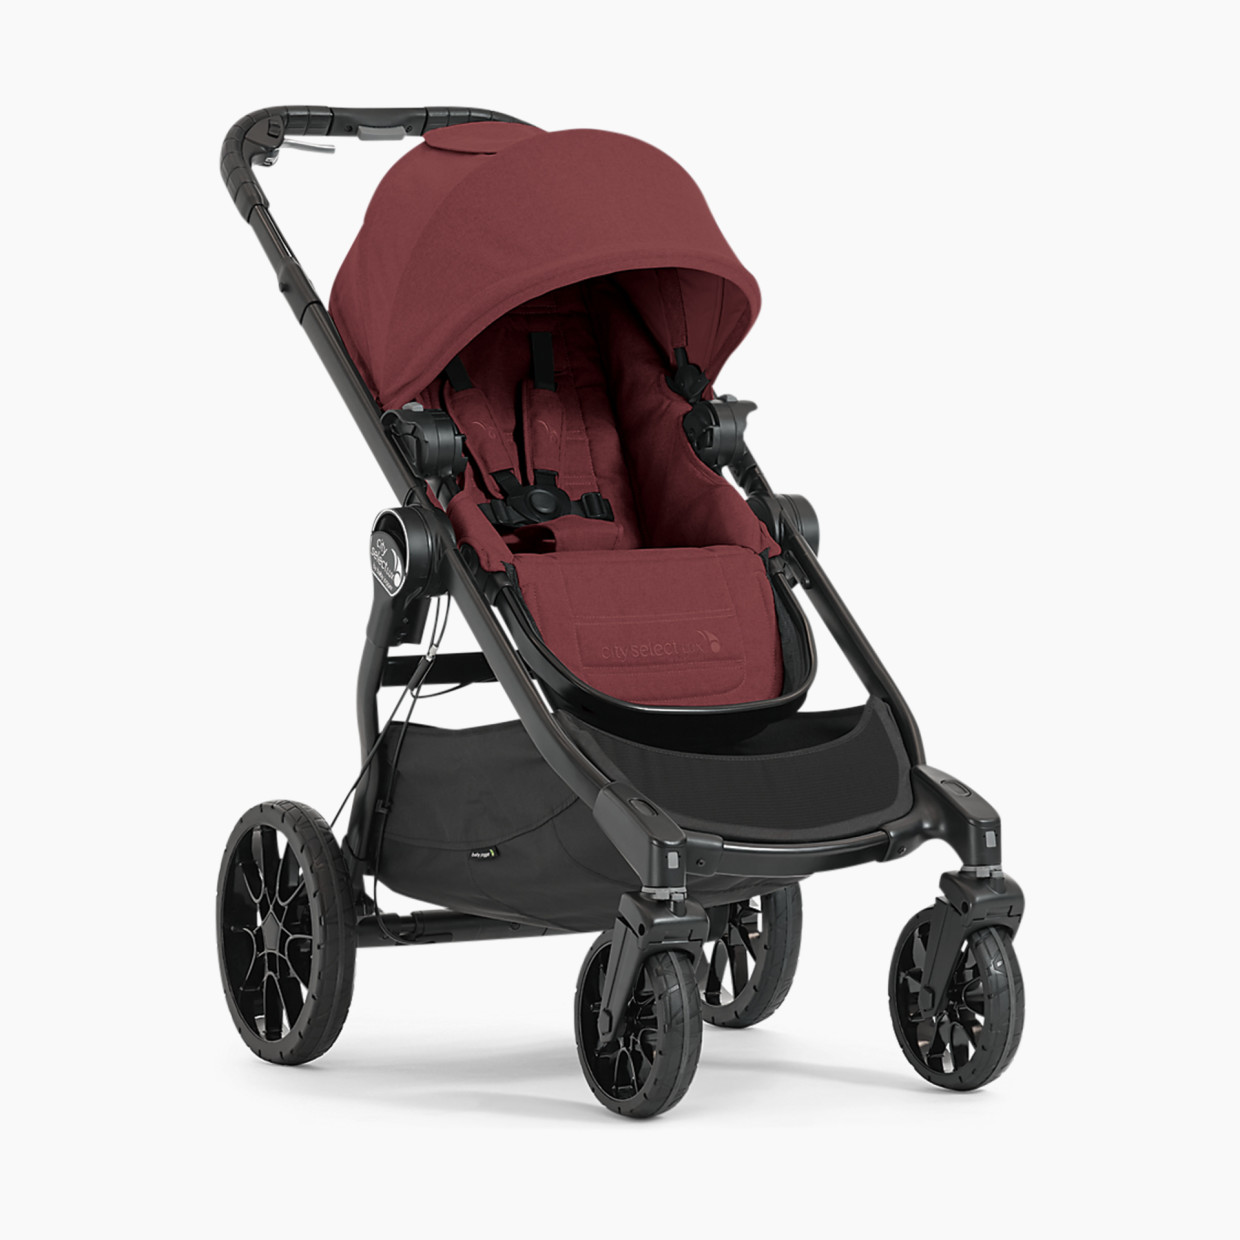 Baby Jogger City Select Lux Stroller - Port.